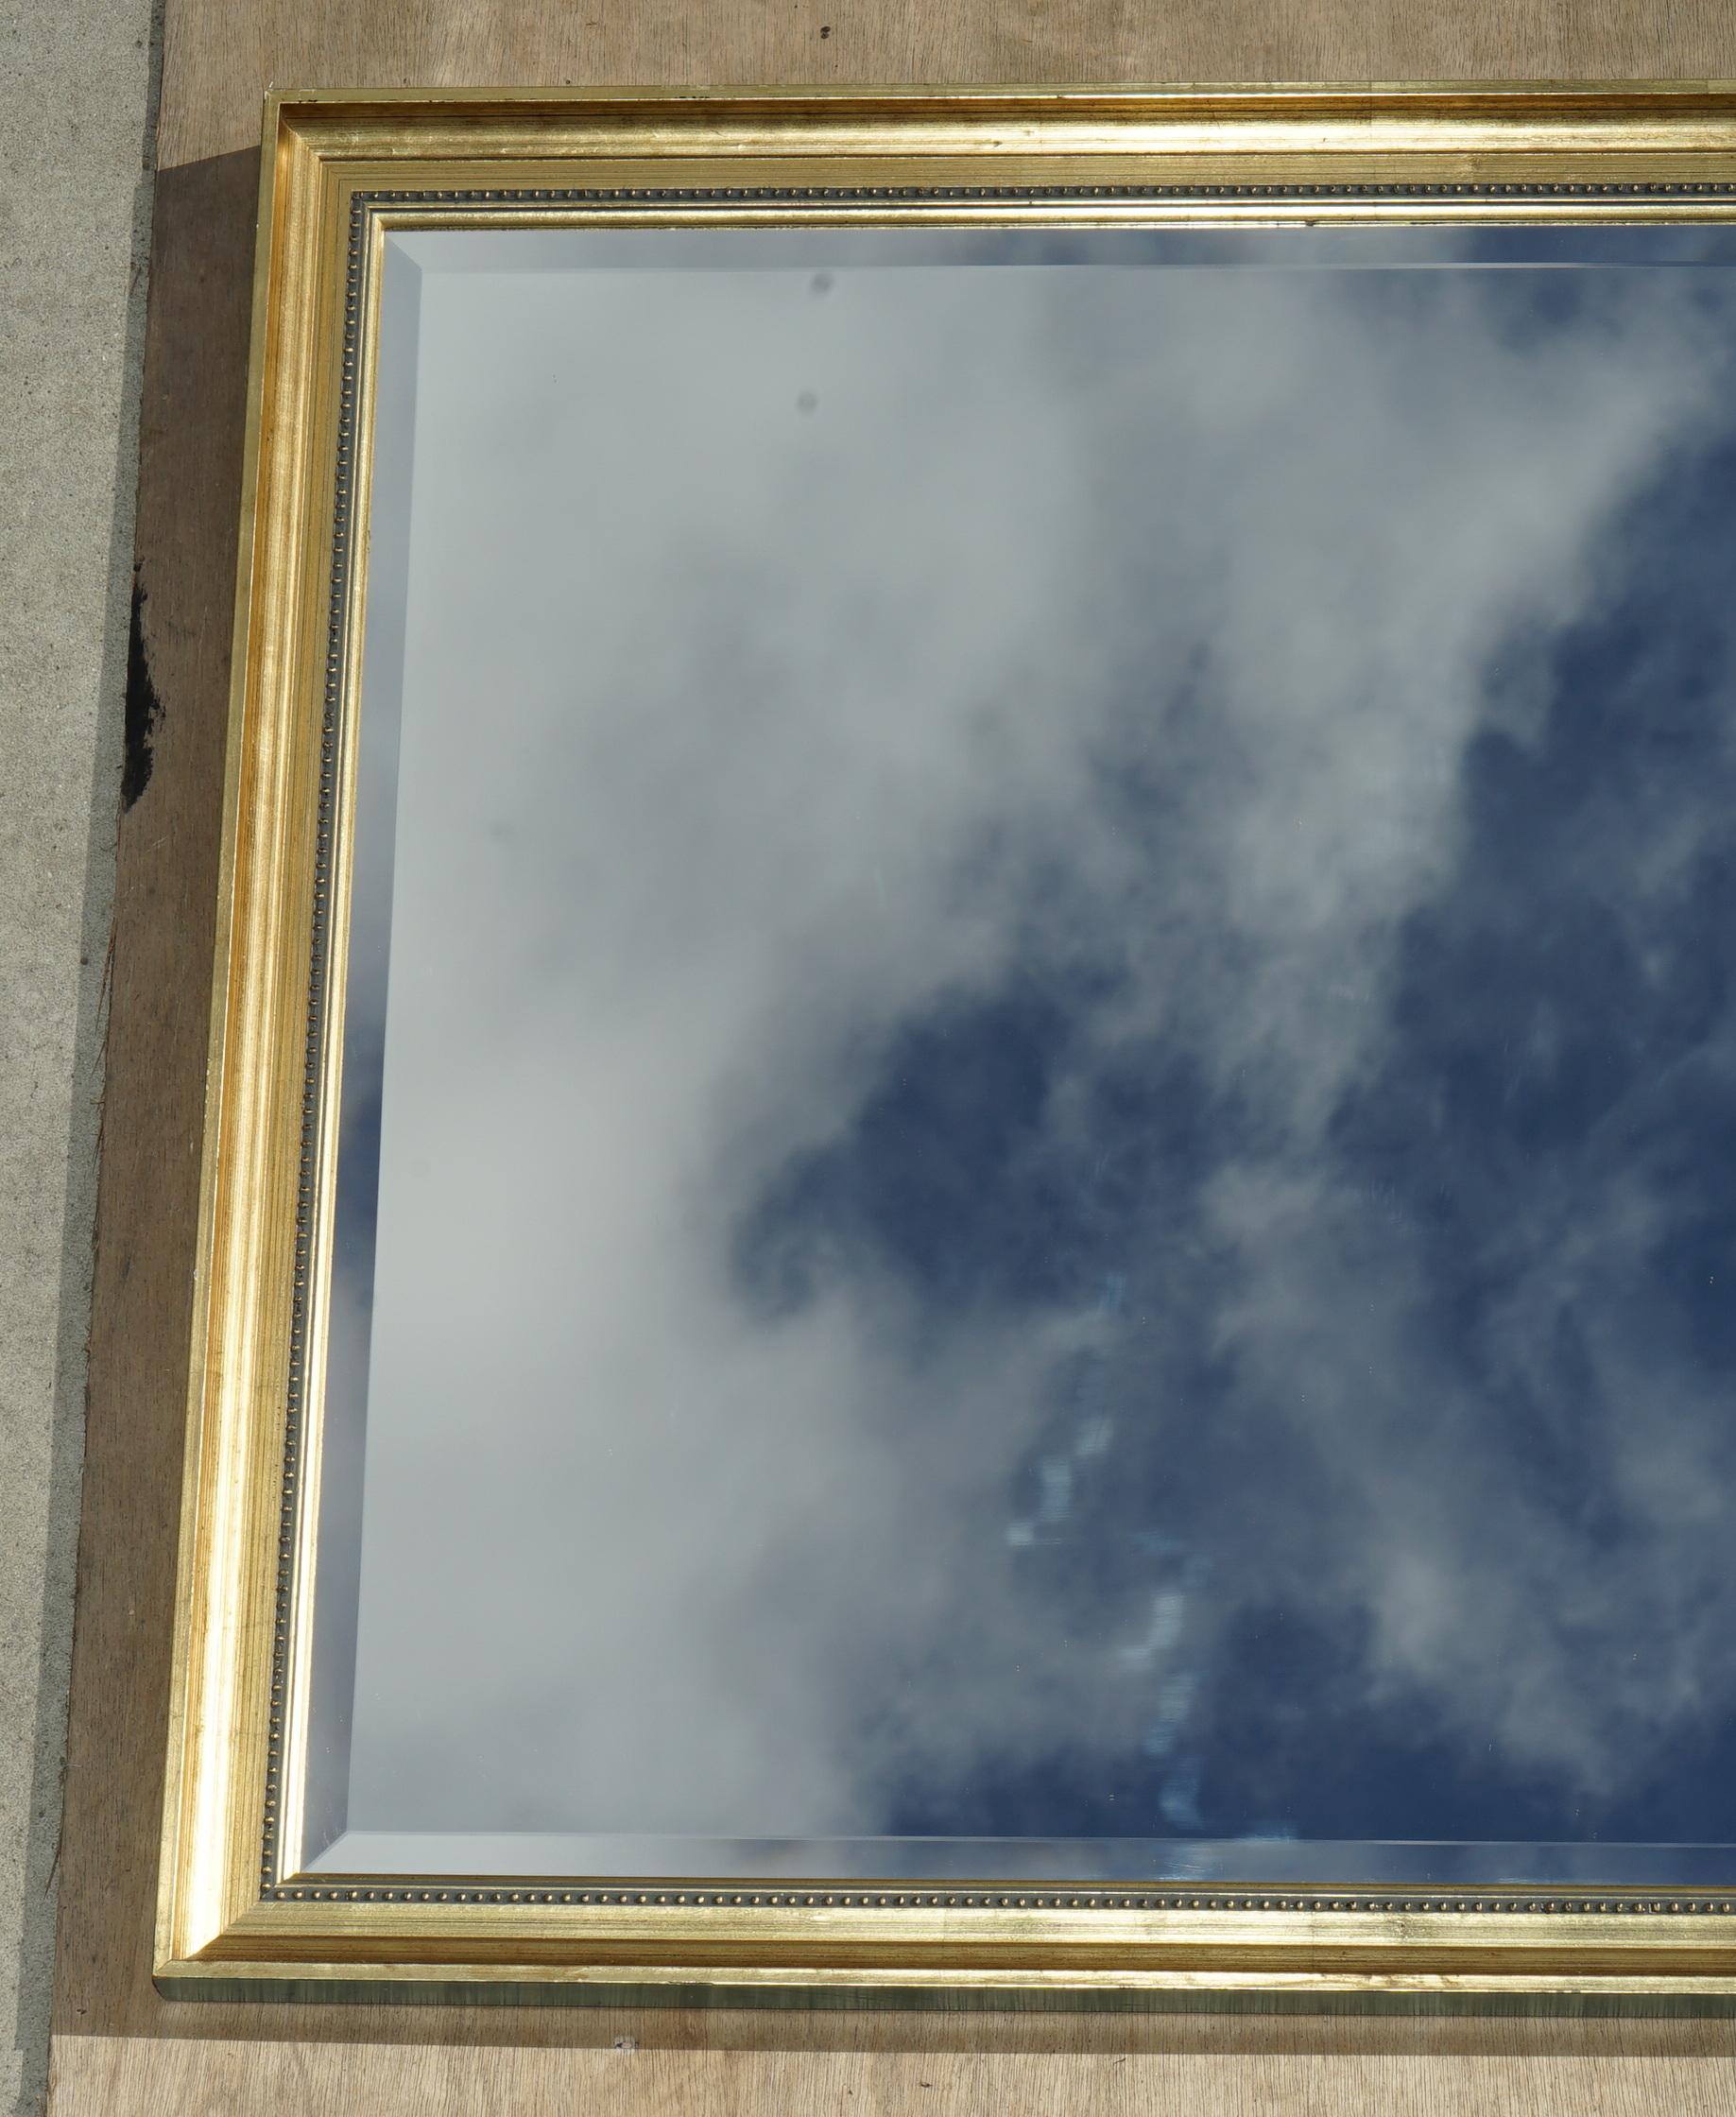 We are delighted to offer for sale this very nice modern Giltwood wall mirror with bevelled edge glass plate

A very good looking and decorative mirror, it can be used in multiple locations, bedroom, hallway and so on

You can see the sky in the